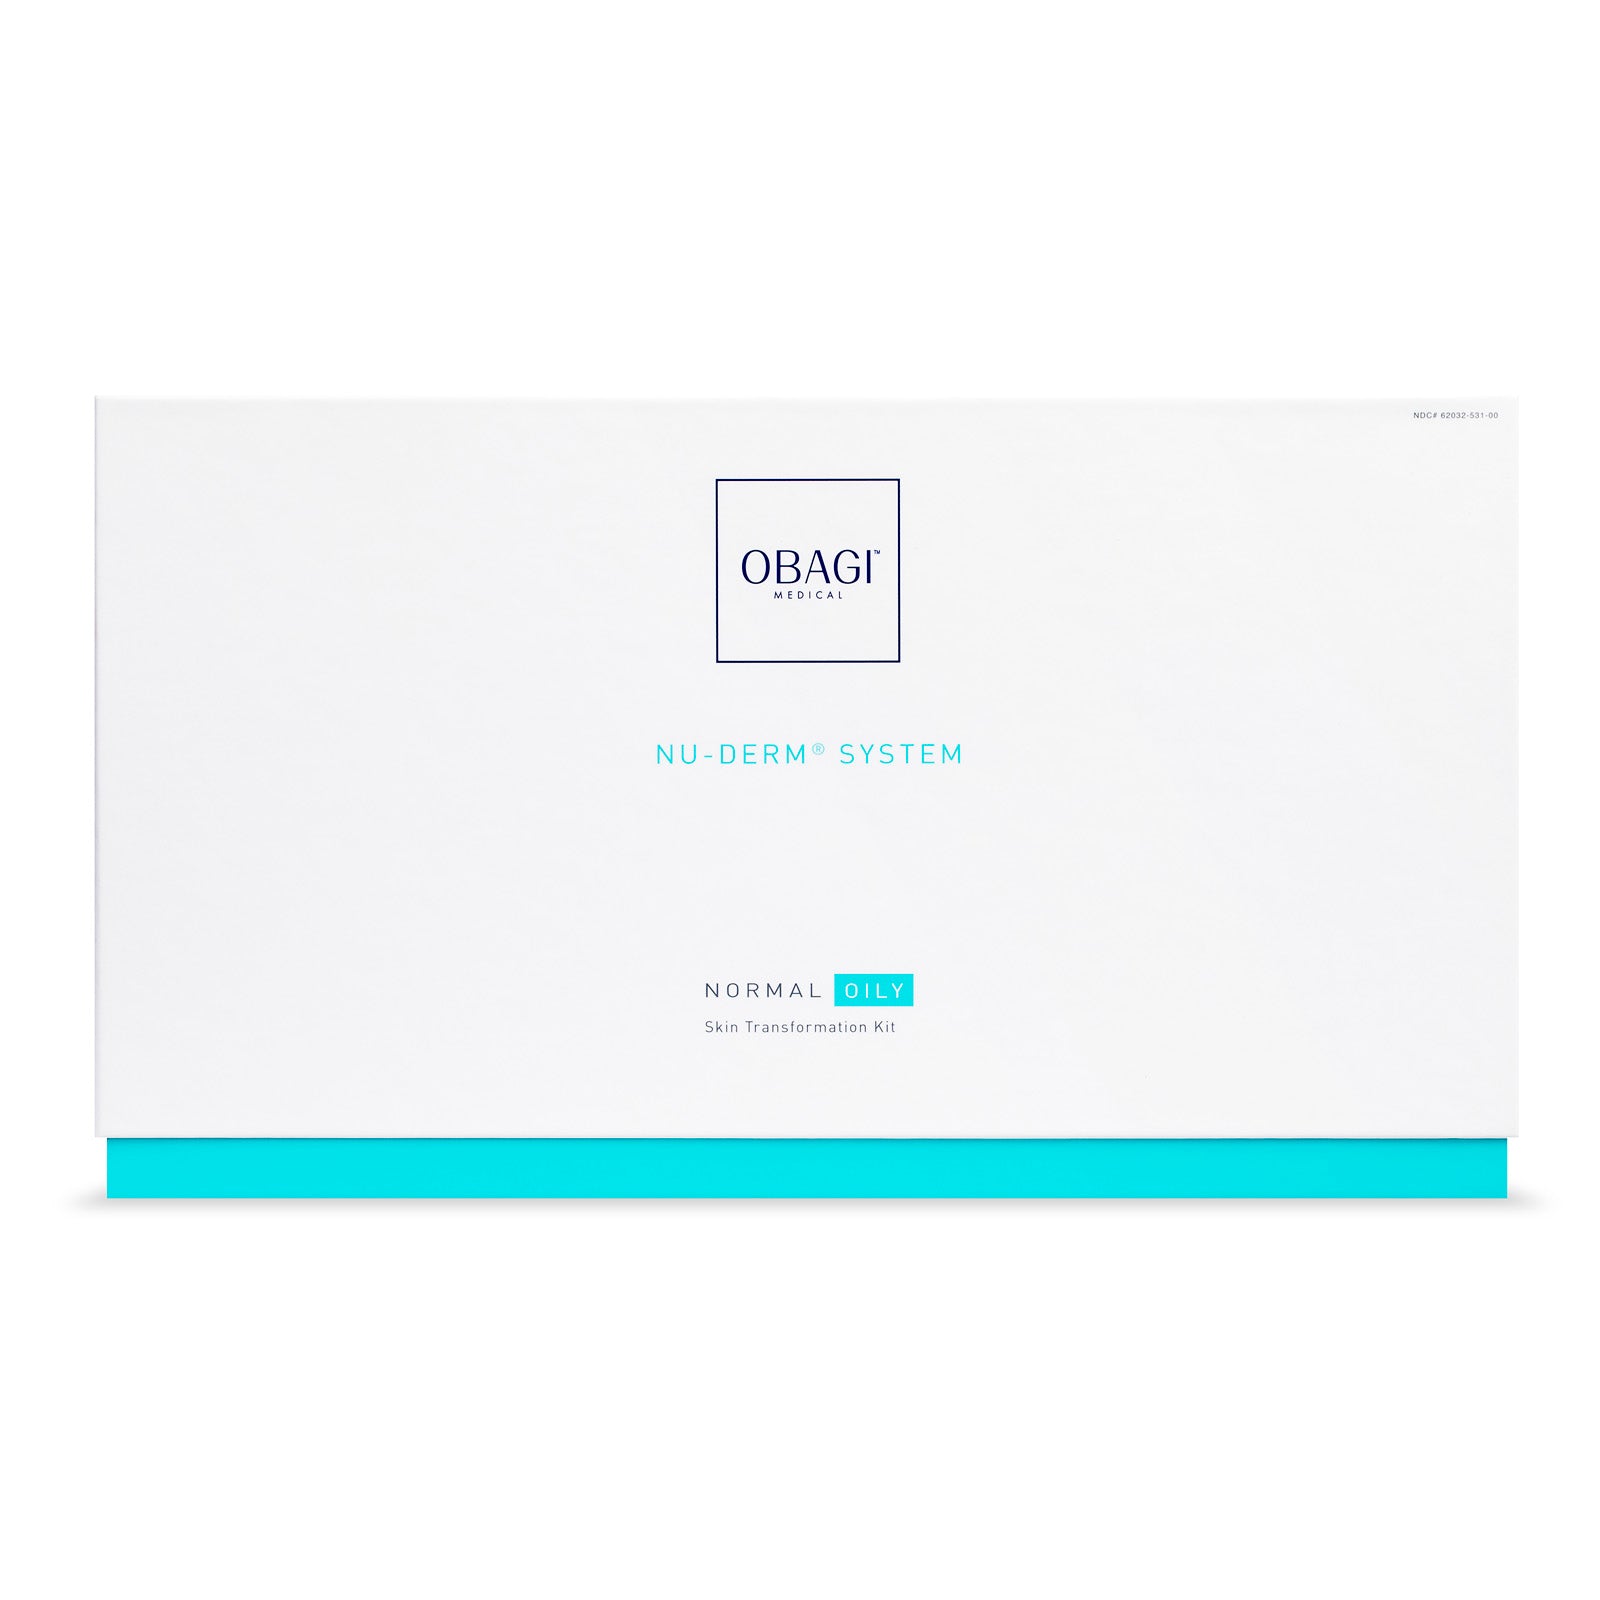 Obagi Nu-Derm Transformation Kit Norm-Oily Complete skin transformation system - Beauty By Vianna